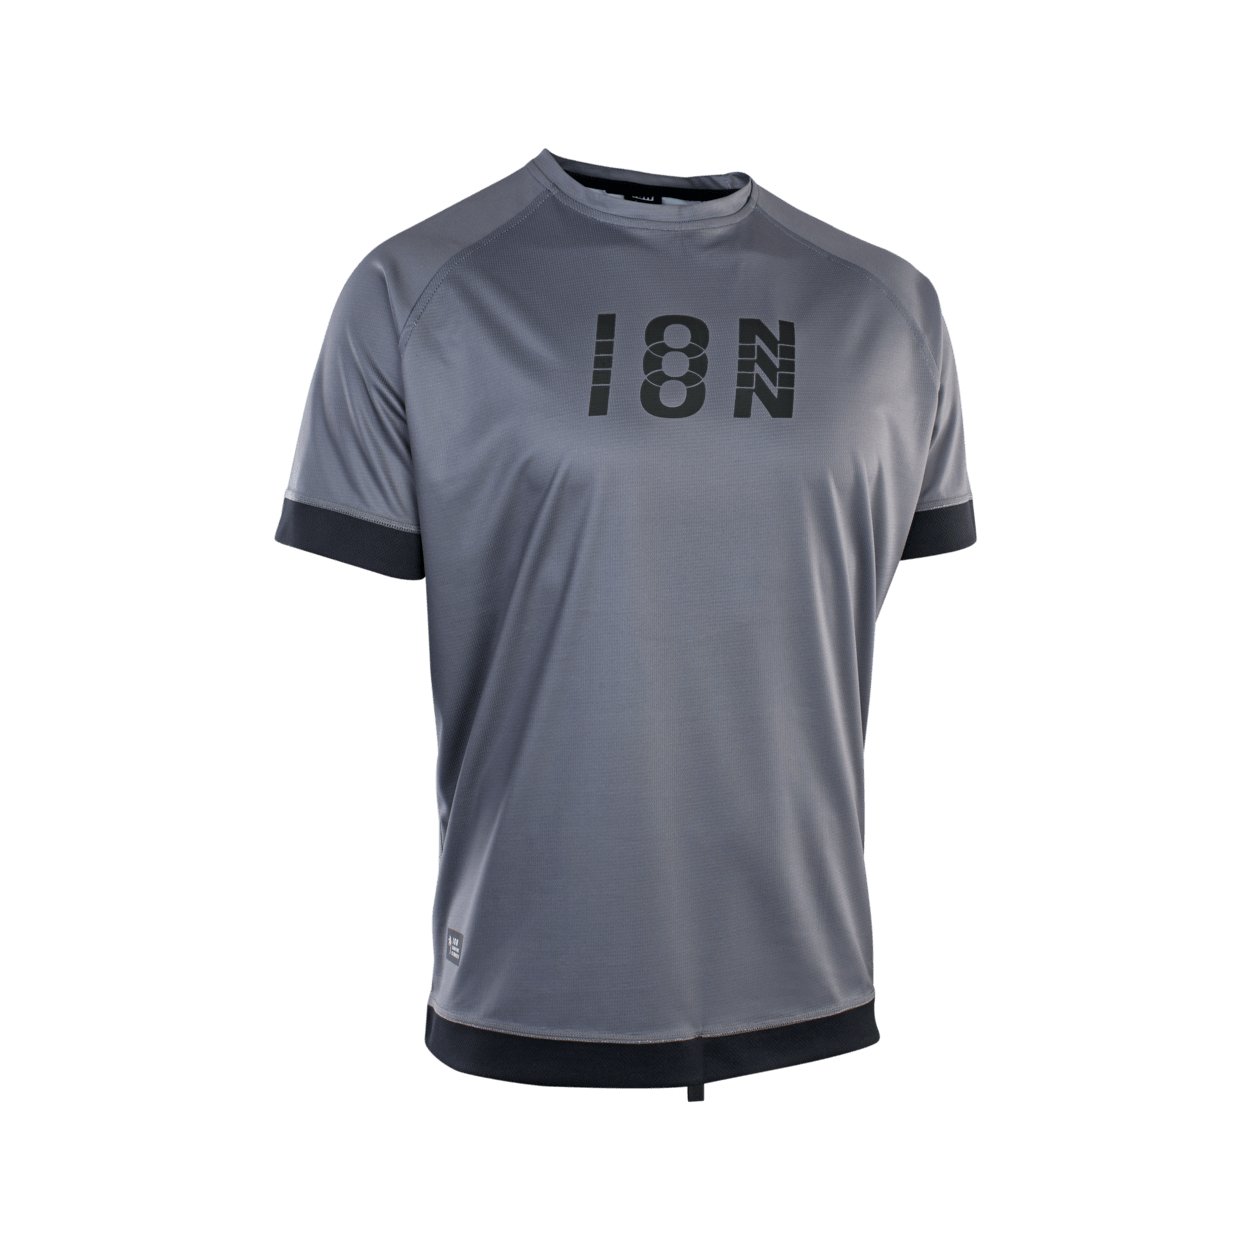 ION Wetshirt SS men 2022 - Worthing Watersports - 9010583051024 - Tops - ION Water